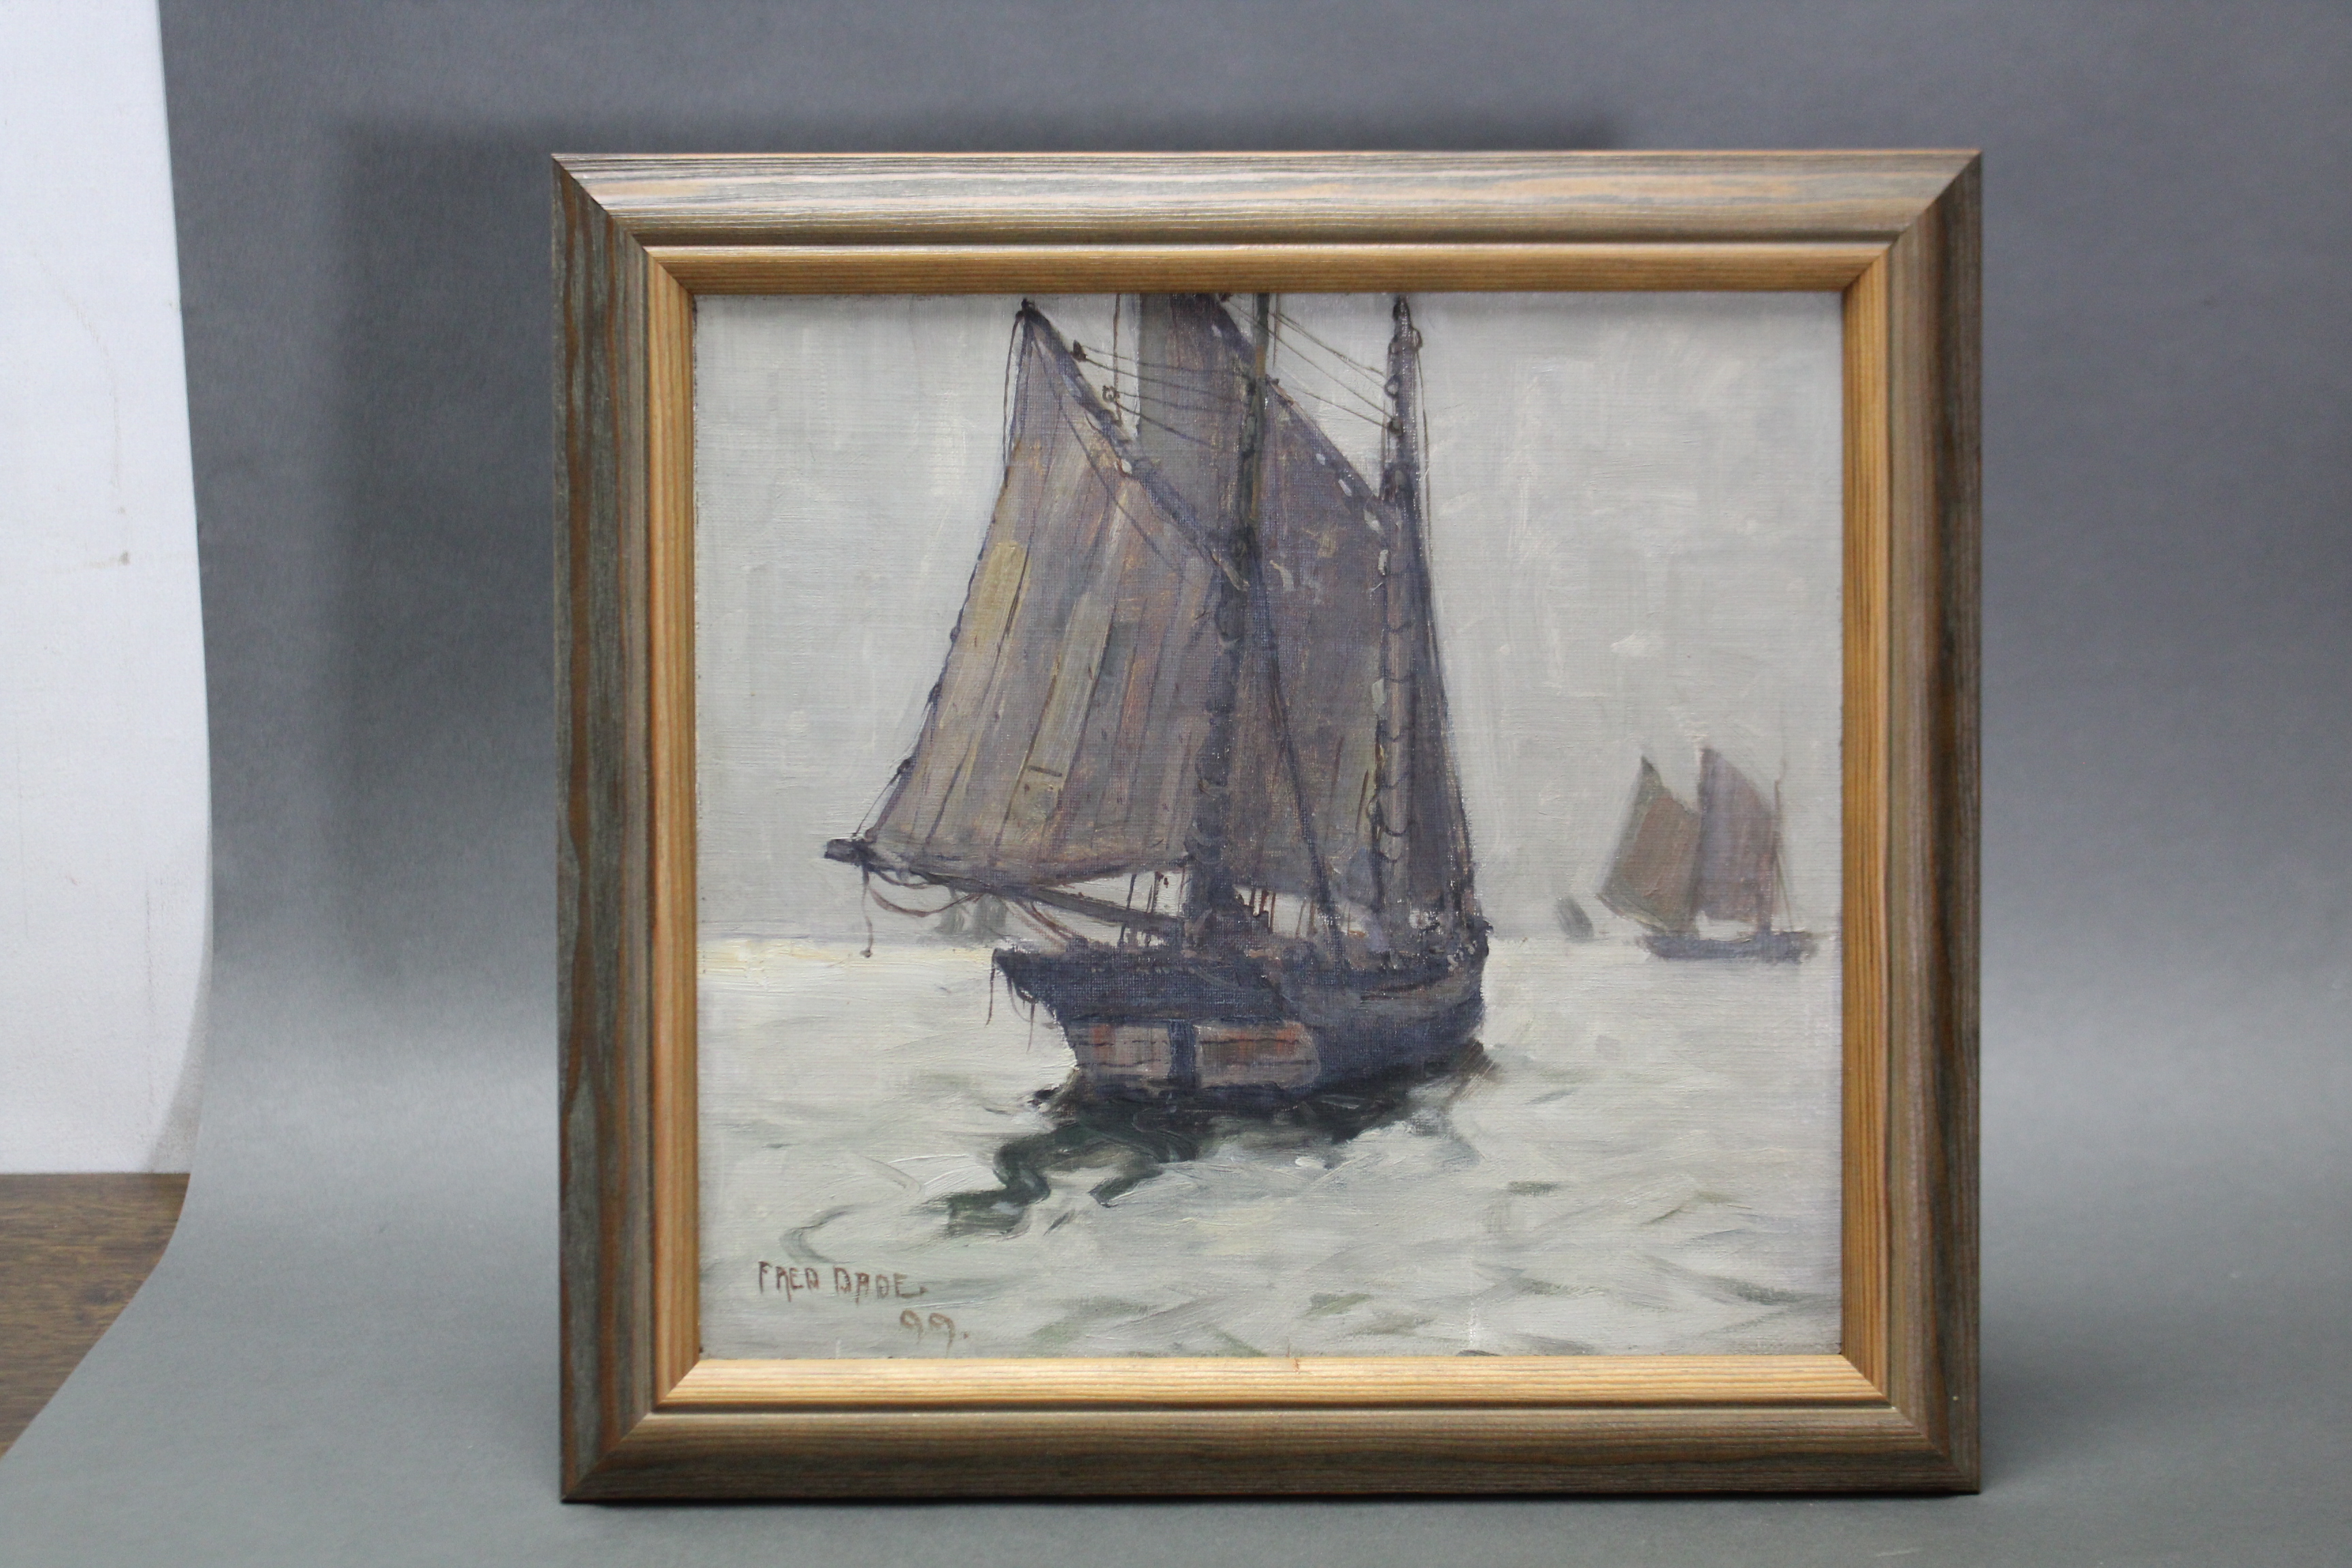 FREDERICK DADE (1874-1908). A two-masted fishing vessel in calm waters, other boats beyond; oil on